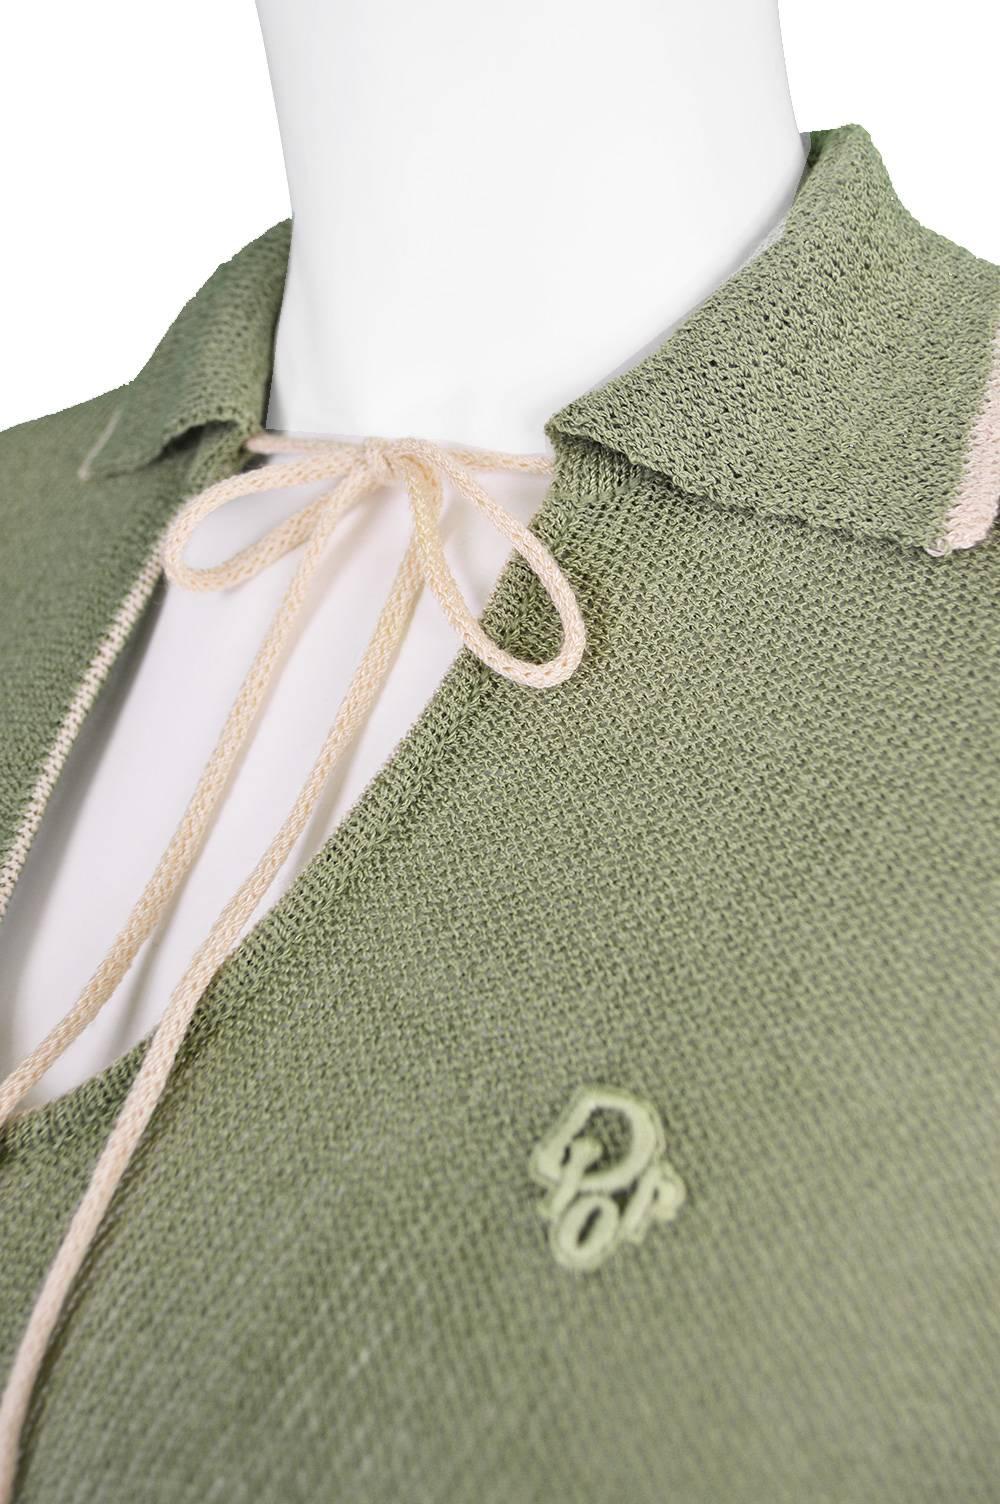 Women's Vintage 1970s Christian Dior Green Knit Skirt Suit with Embroidered Logo For Sale